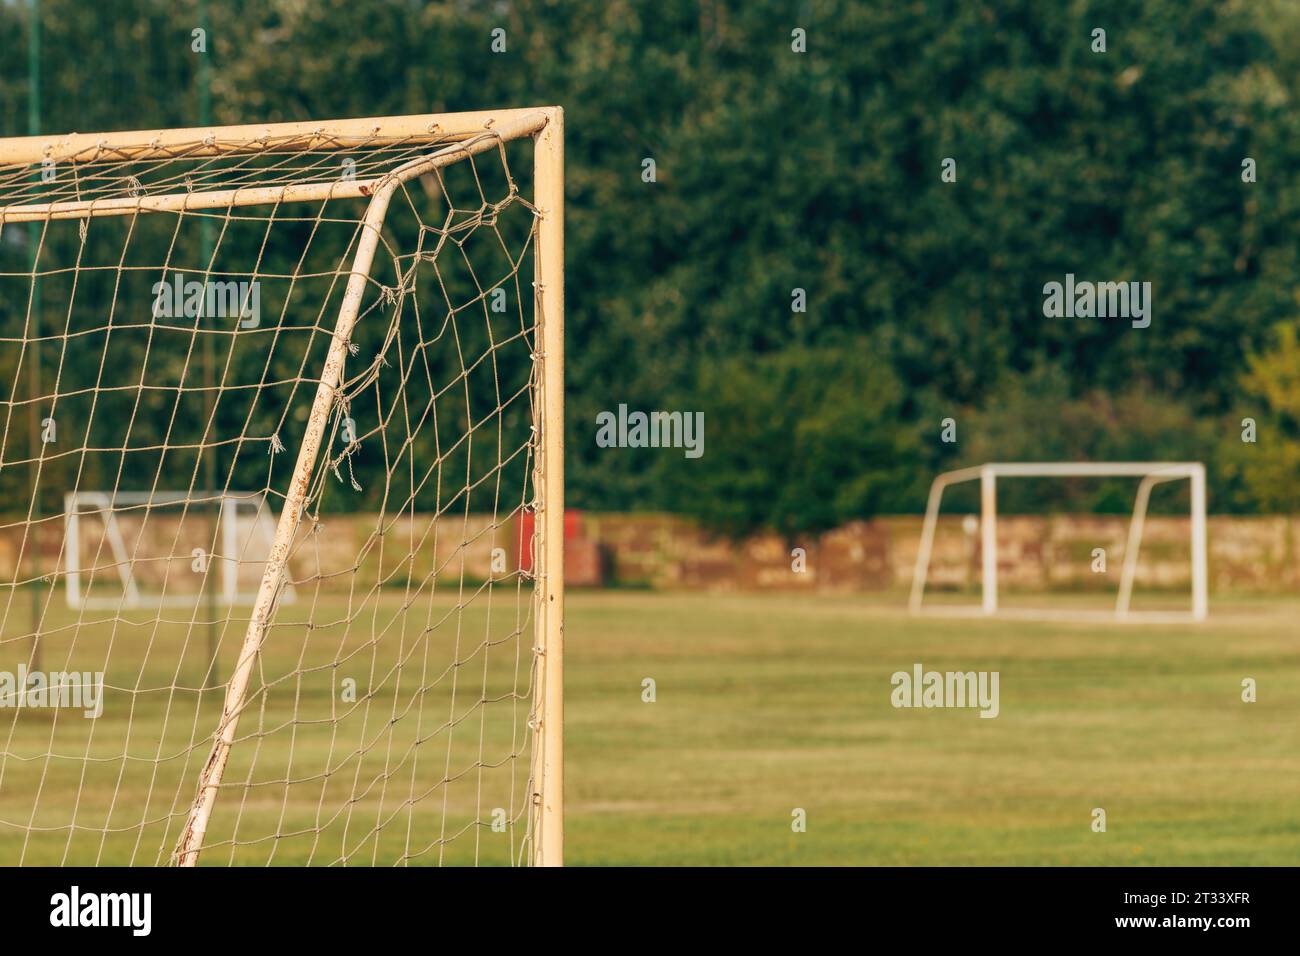 Soccer goal post and net on outdoor training pitch, selective focus Stock Photo